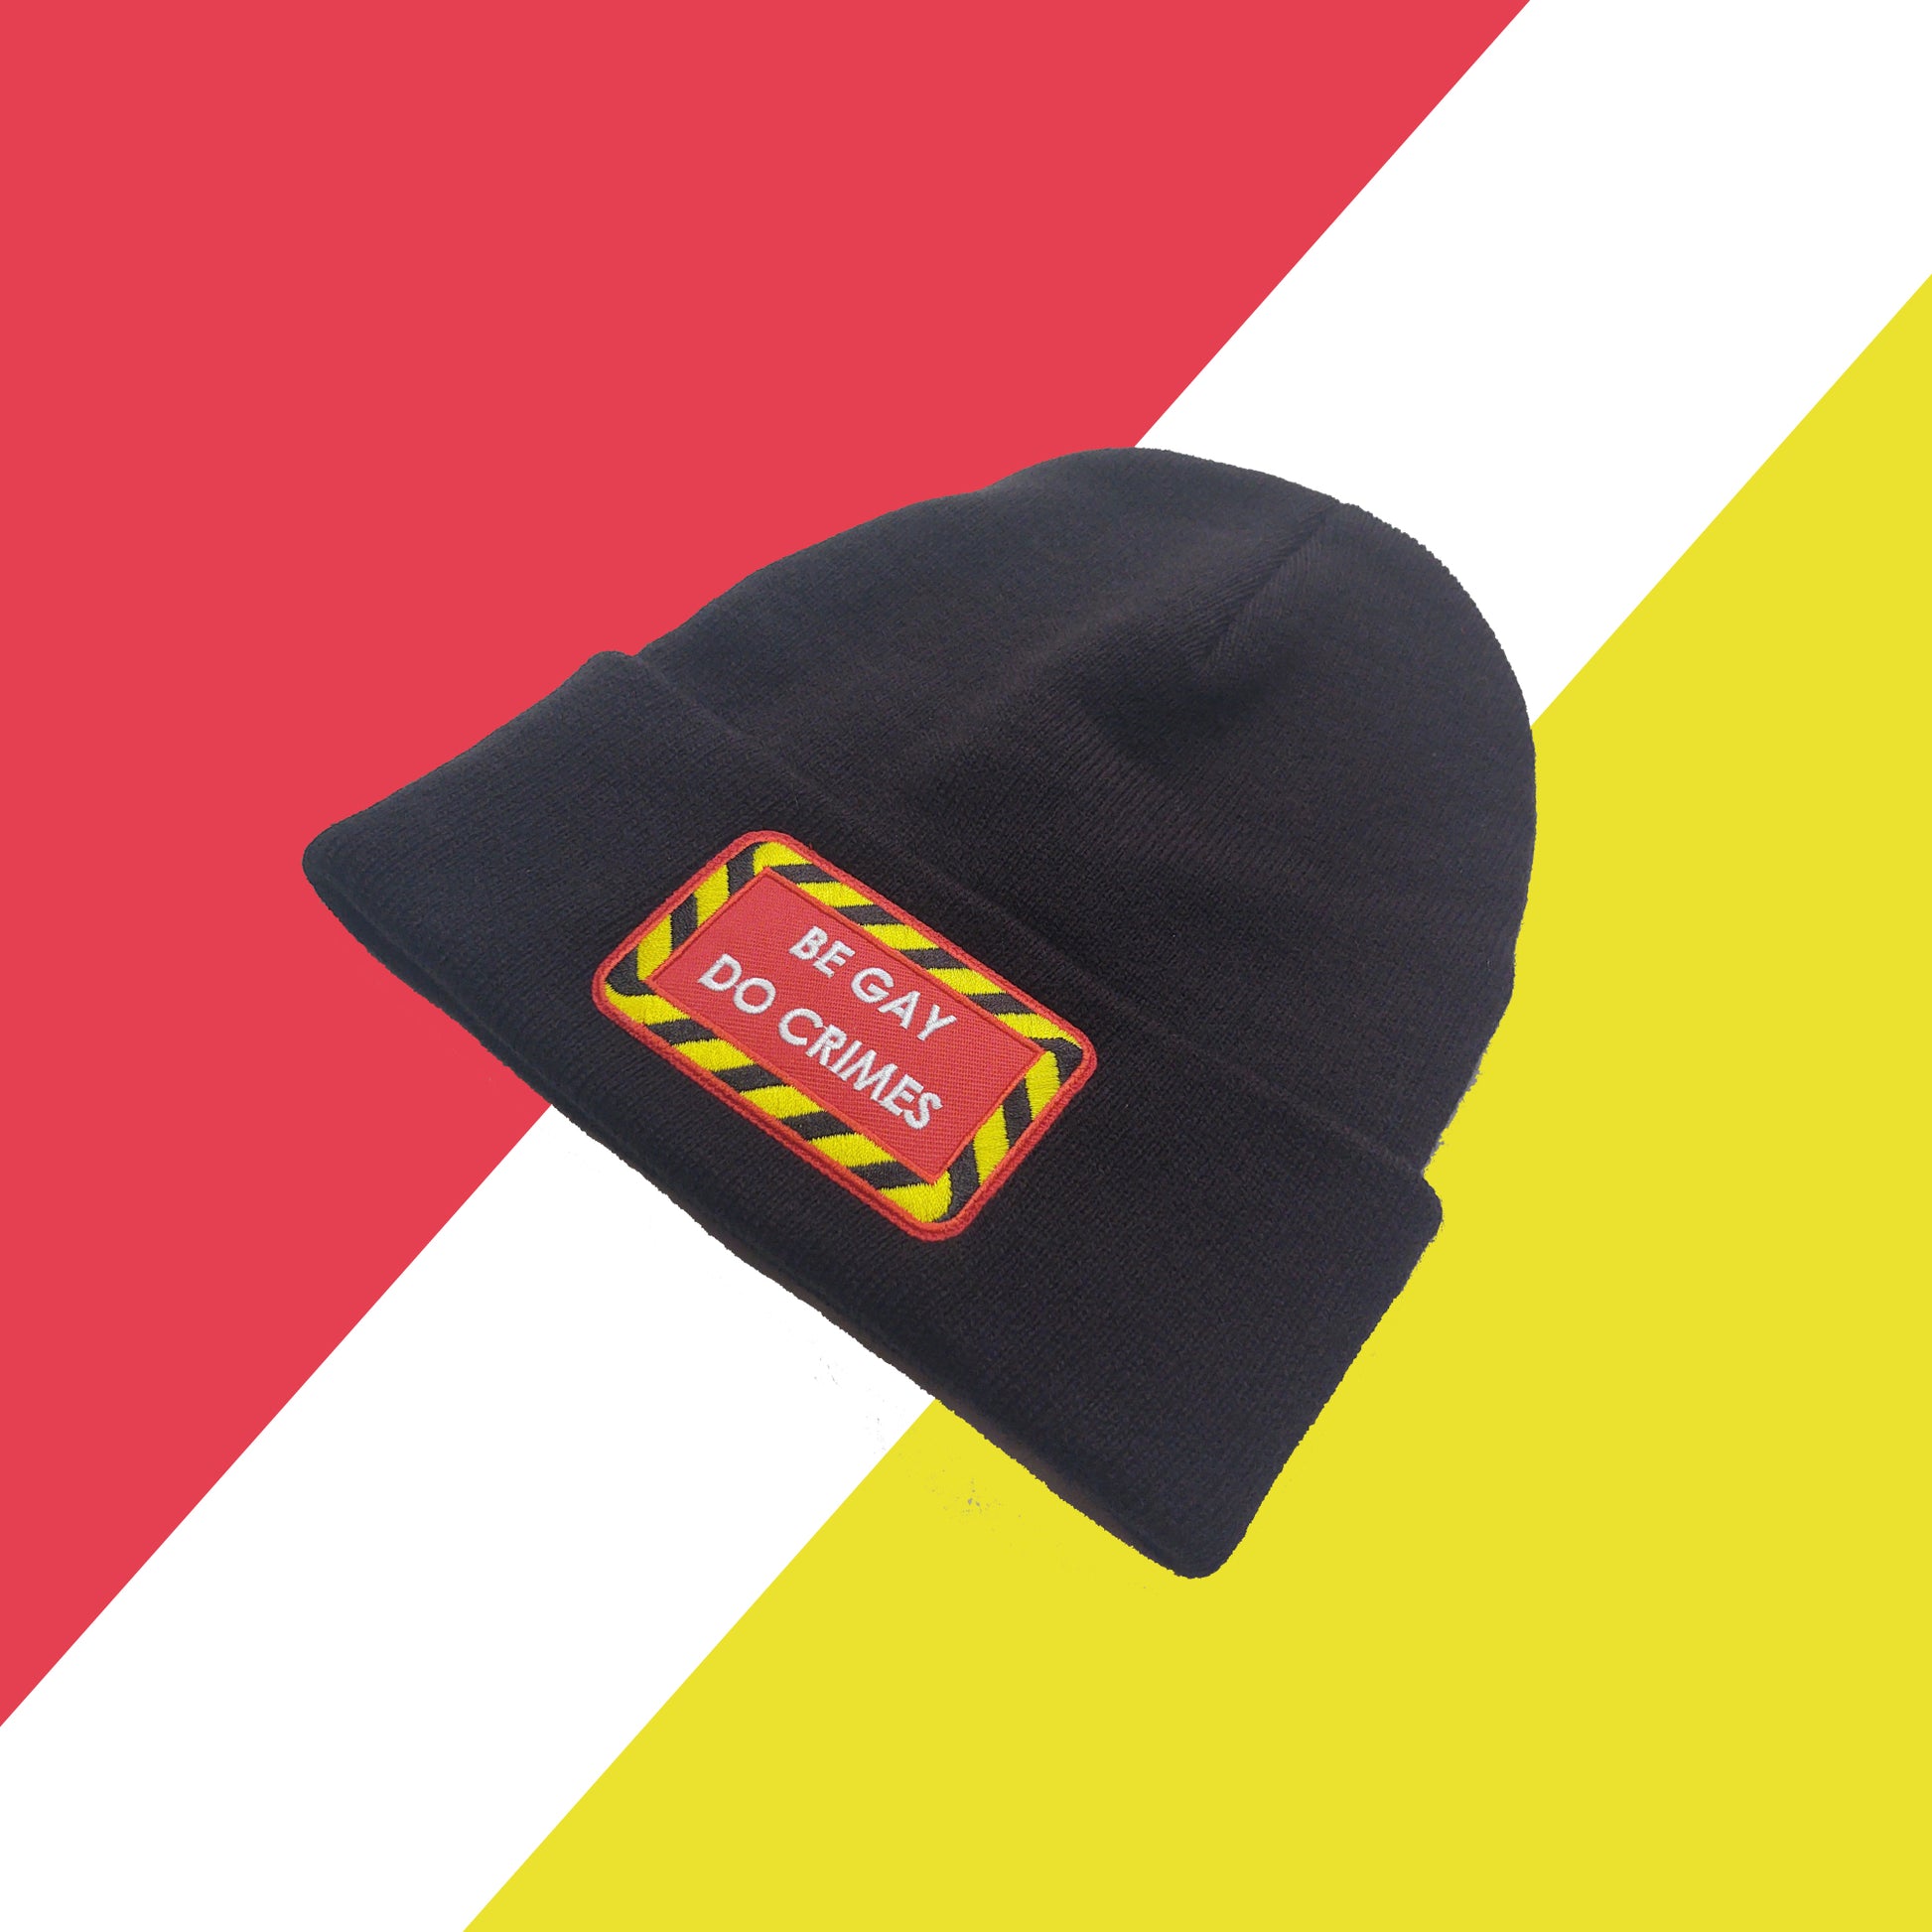 black beanie set at an angle with red patch on the front with yellow and black striped border and white text reading "be gay do crimes". Background is red white and yellow shapes